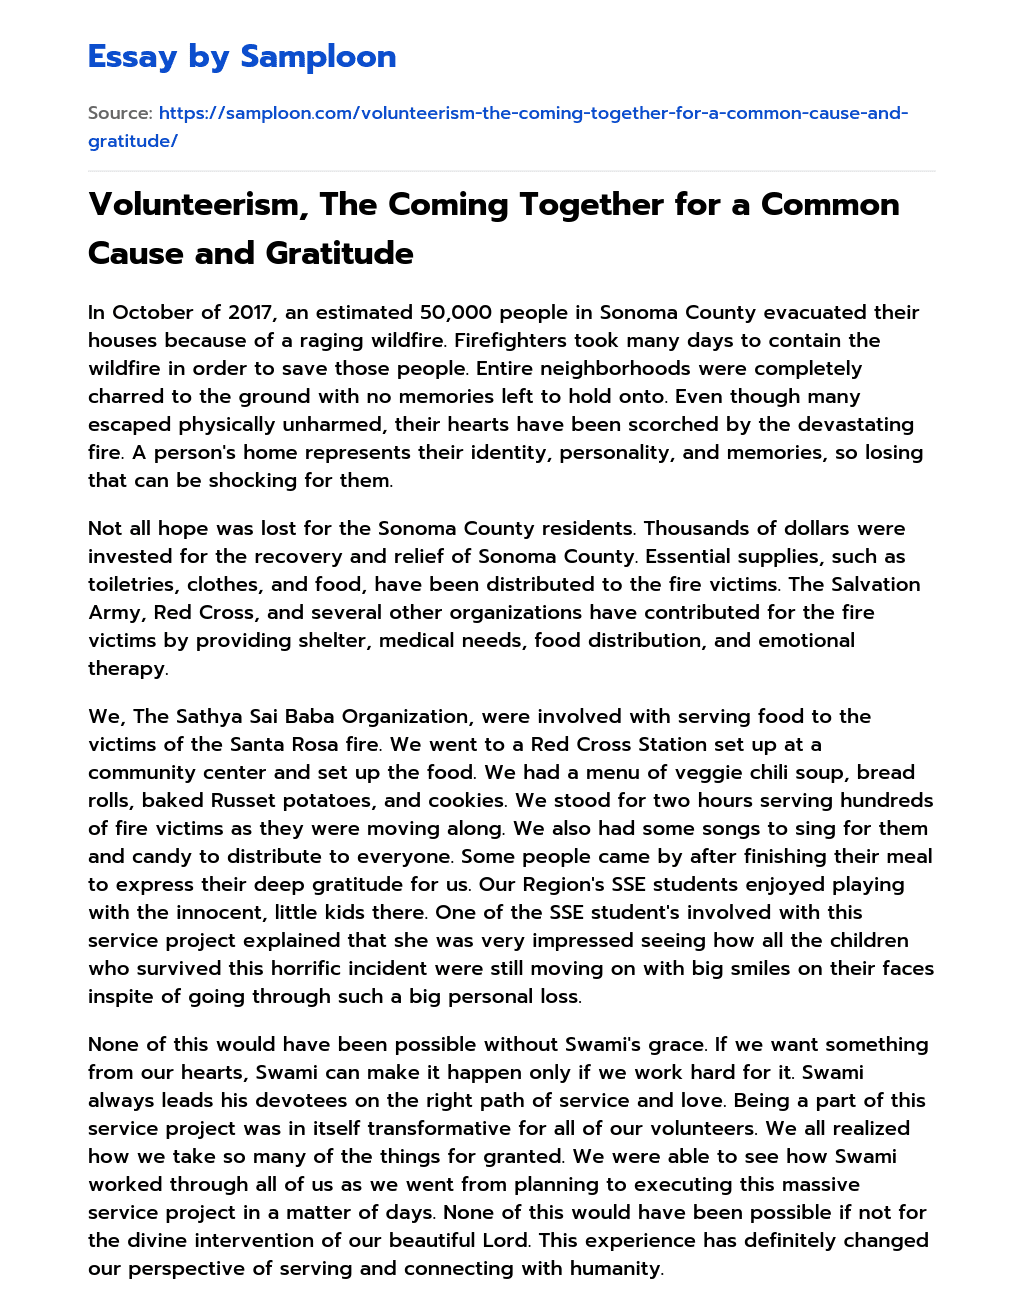 Volunteerism, The Coming Together for a Common Cause and Gratitude essay